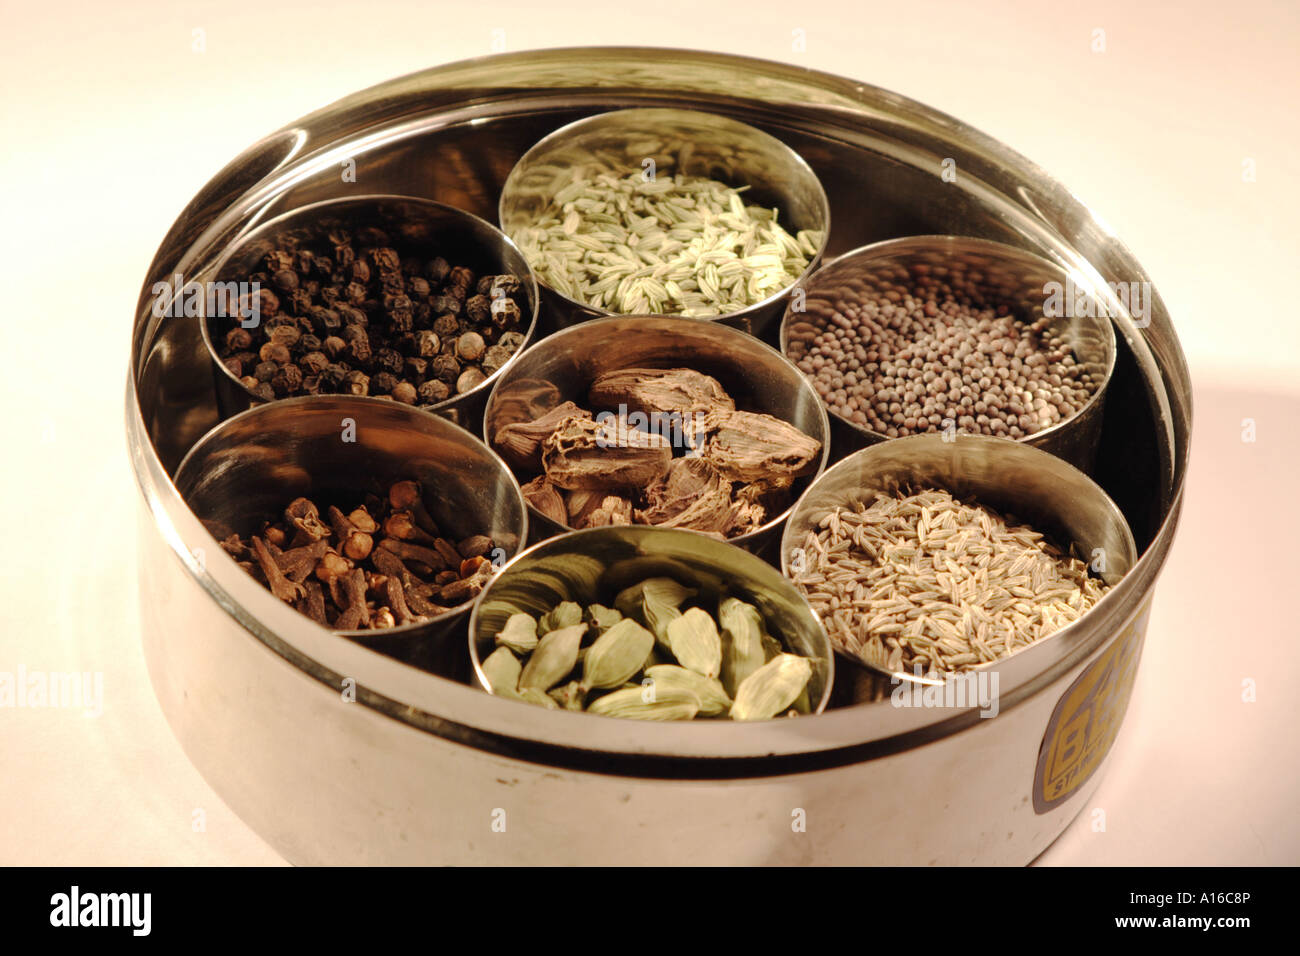 VHM102423 Indian Spices Traditional spice box in India Stock Photo